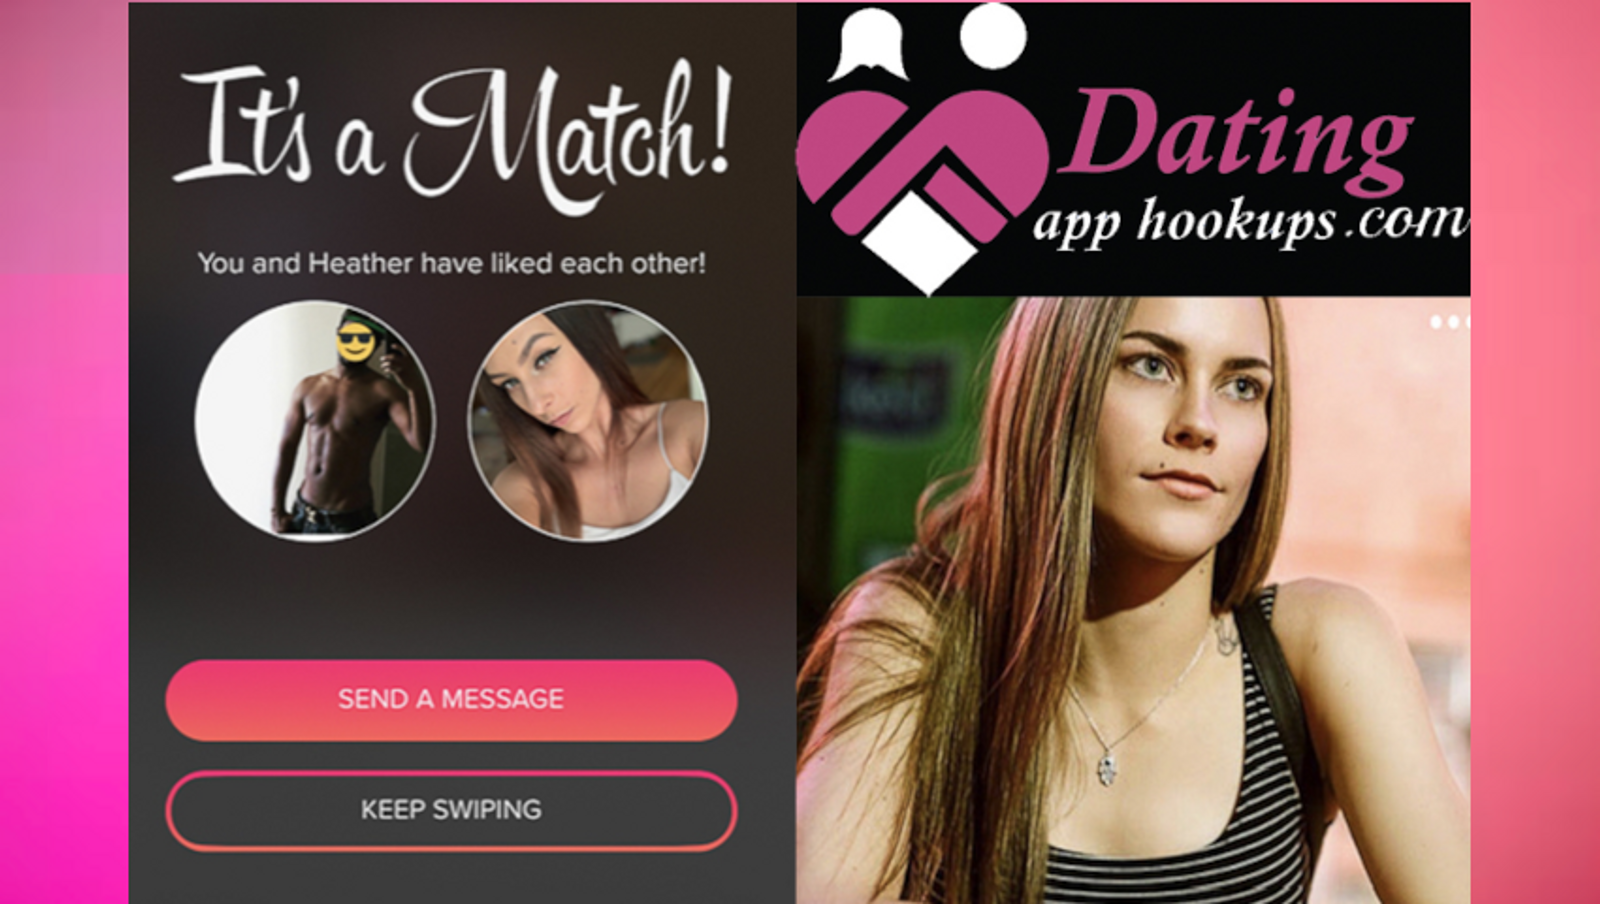 Sofie Marie’s Yummygirl Network Launches DatingAppHookups.com